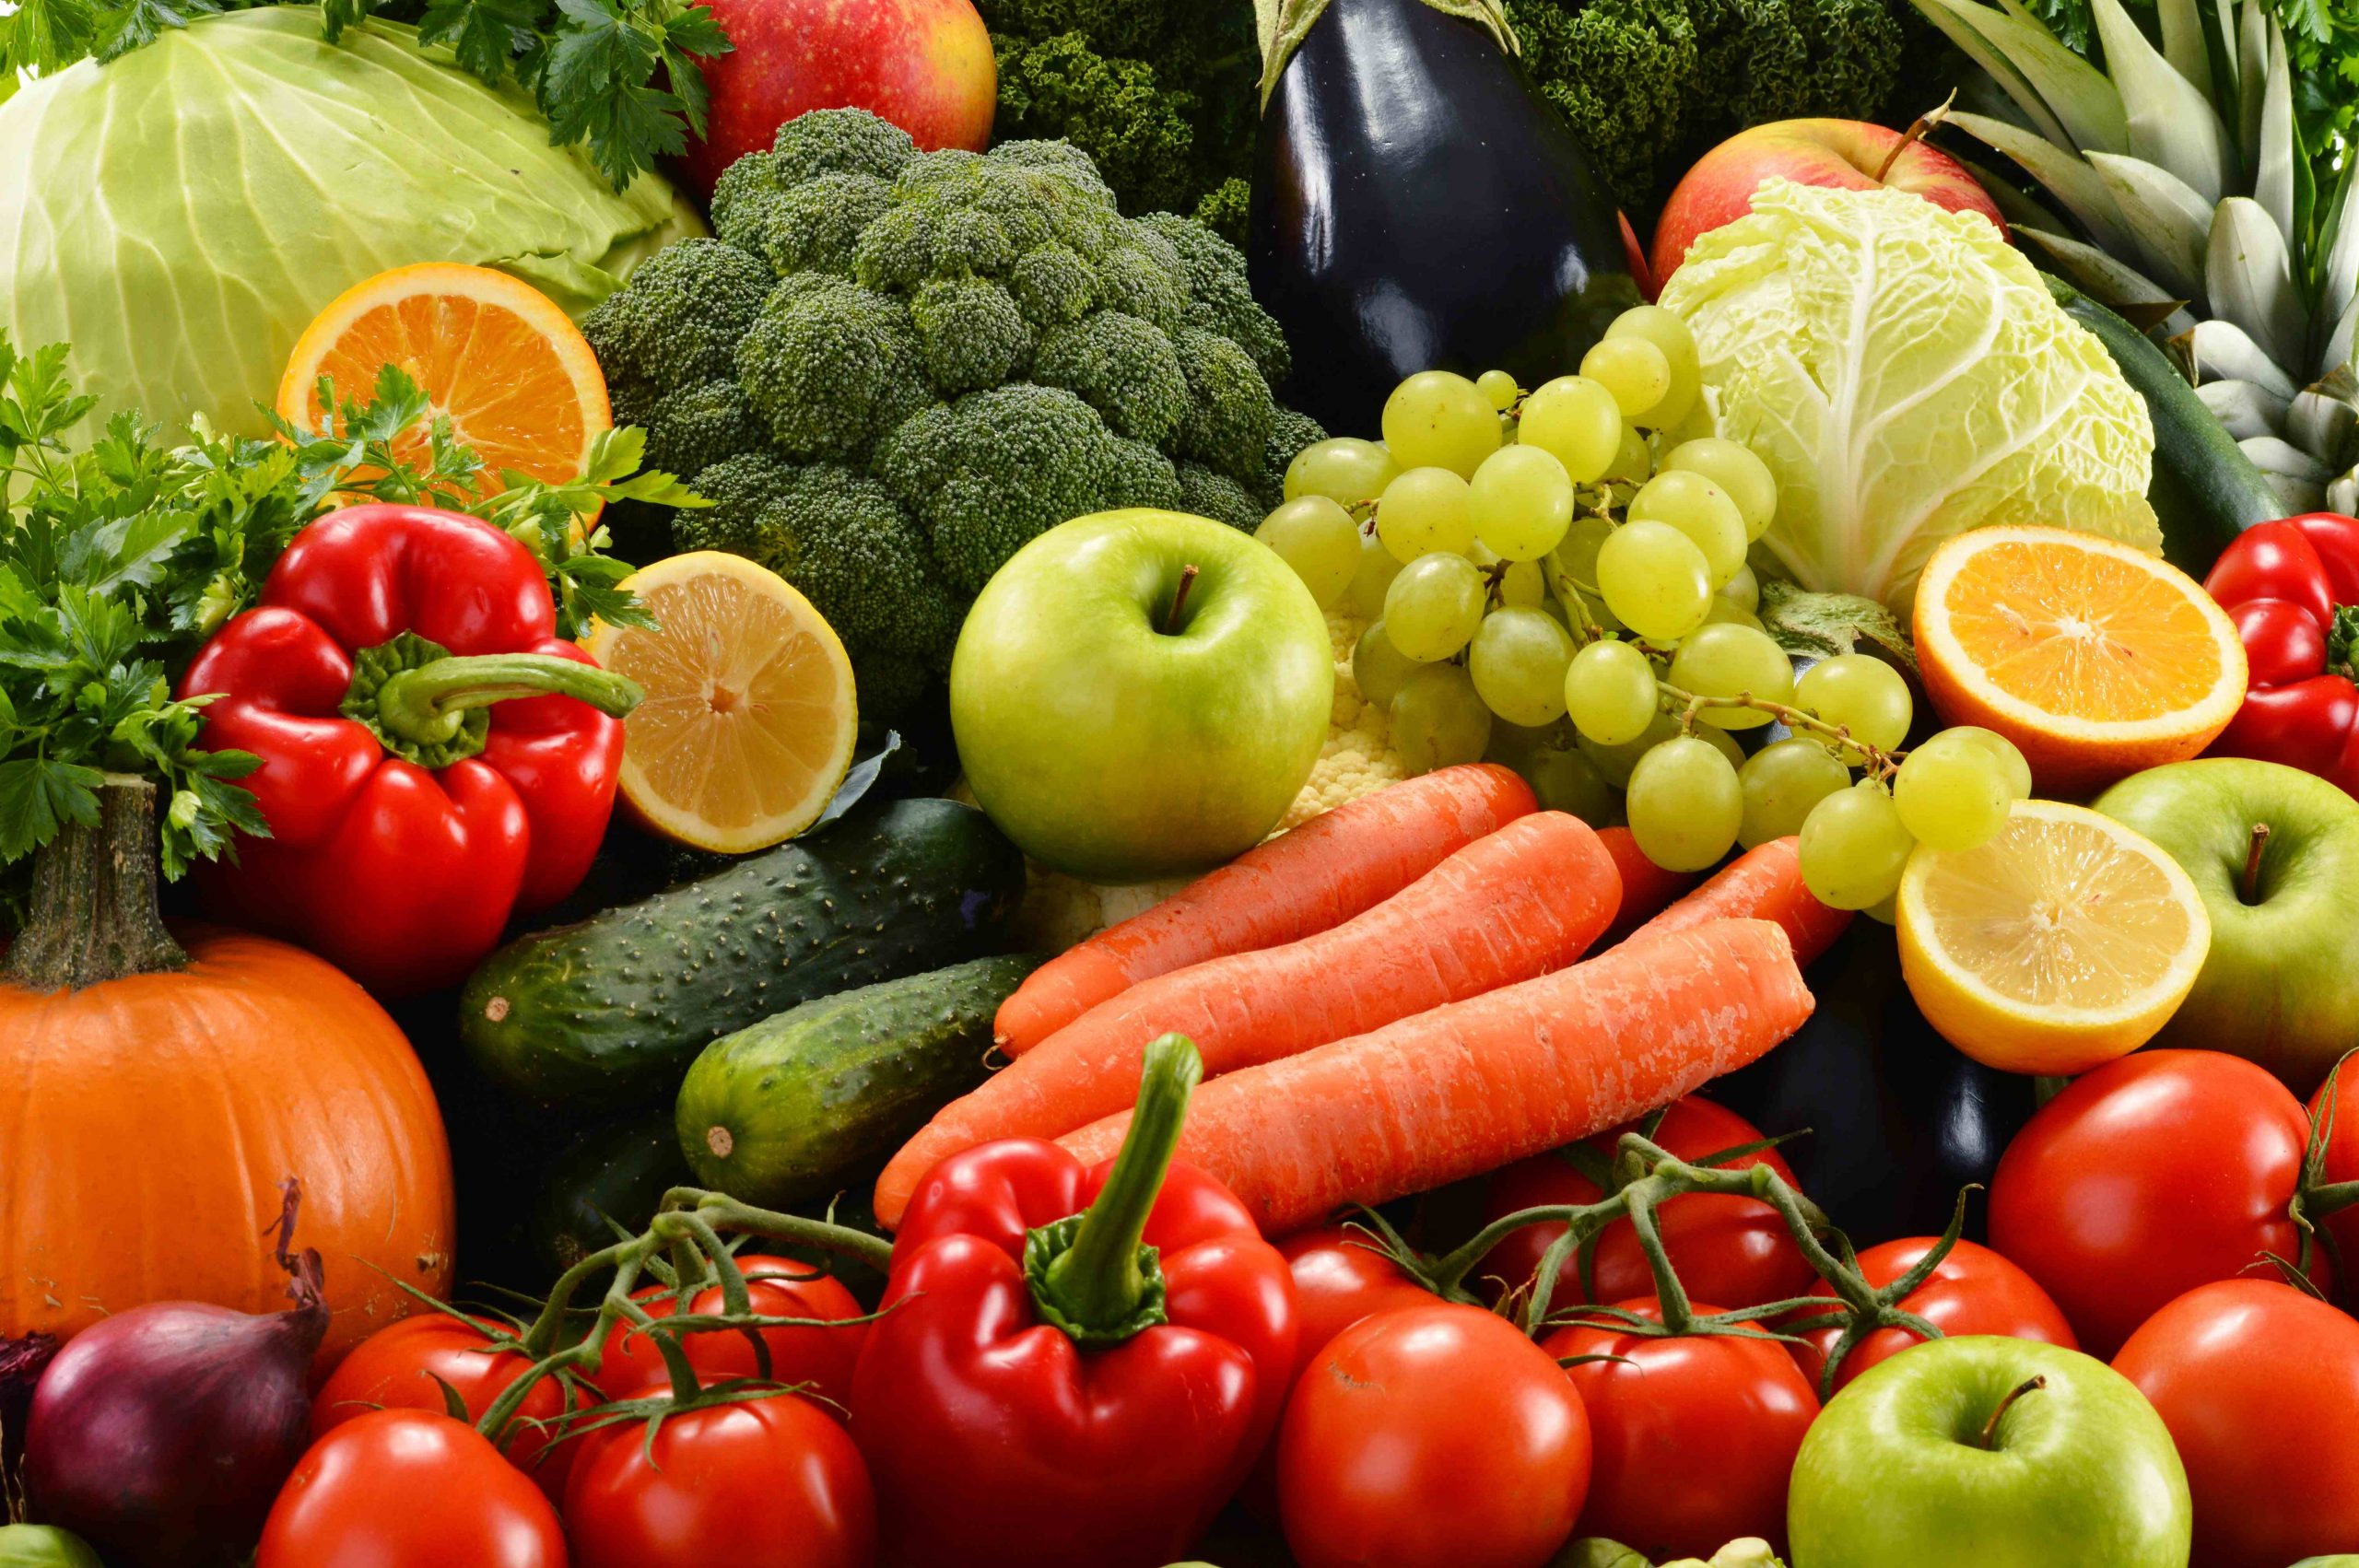 Exports: Increased Value of Greek Fruits, Vegetables to Germany